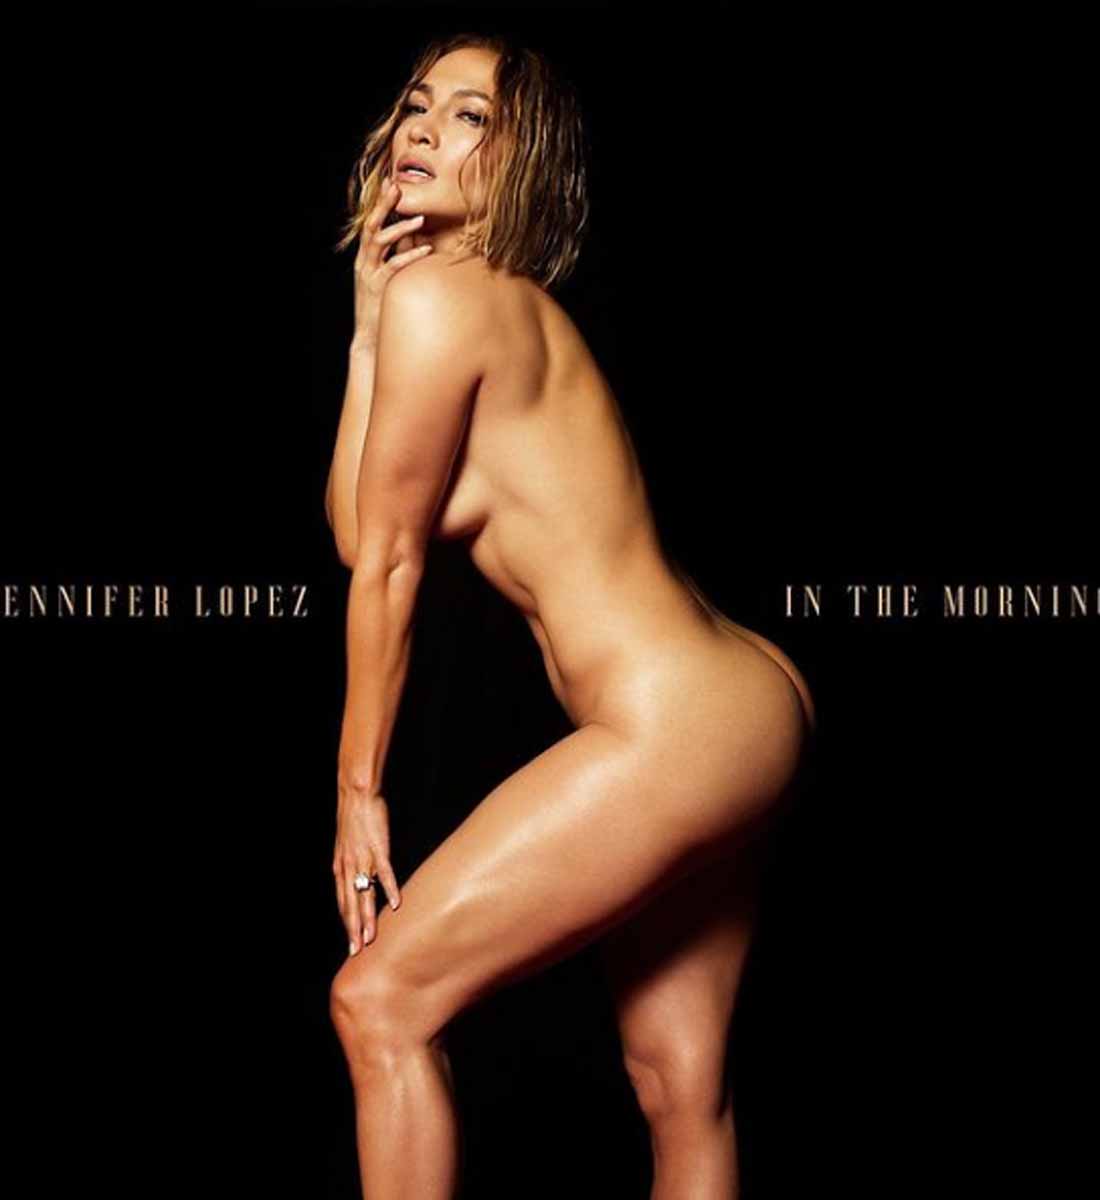 Finally, Jennifer Lopez is a woman and a body - Naked for her new single 17